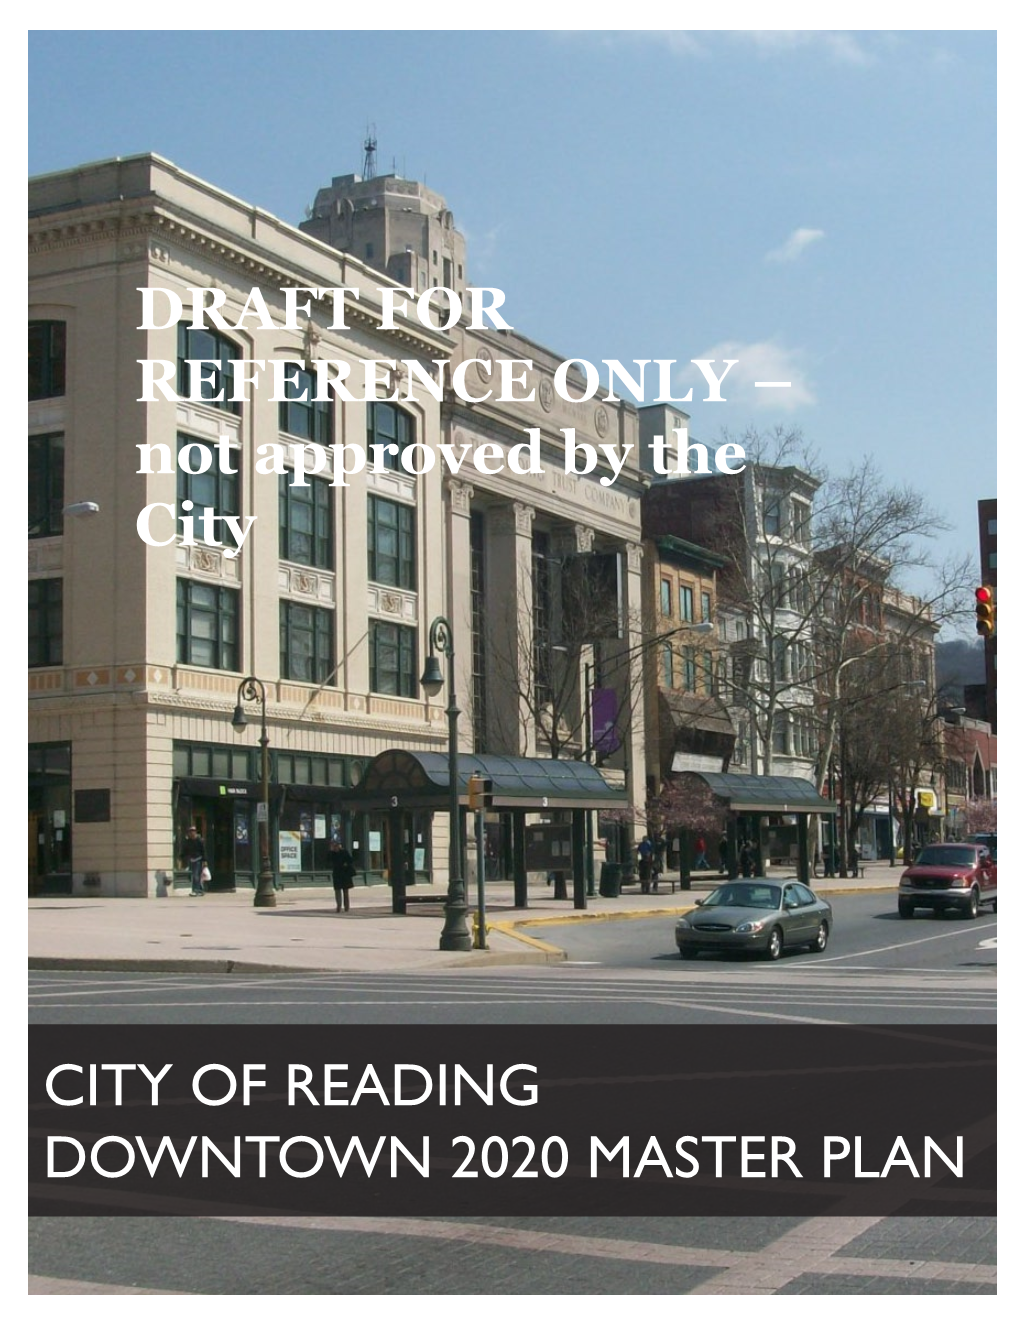 City of Reading Downtown 2020 Master Plan Draft For